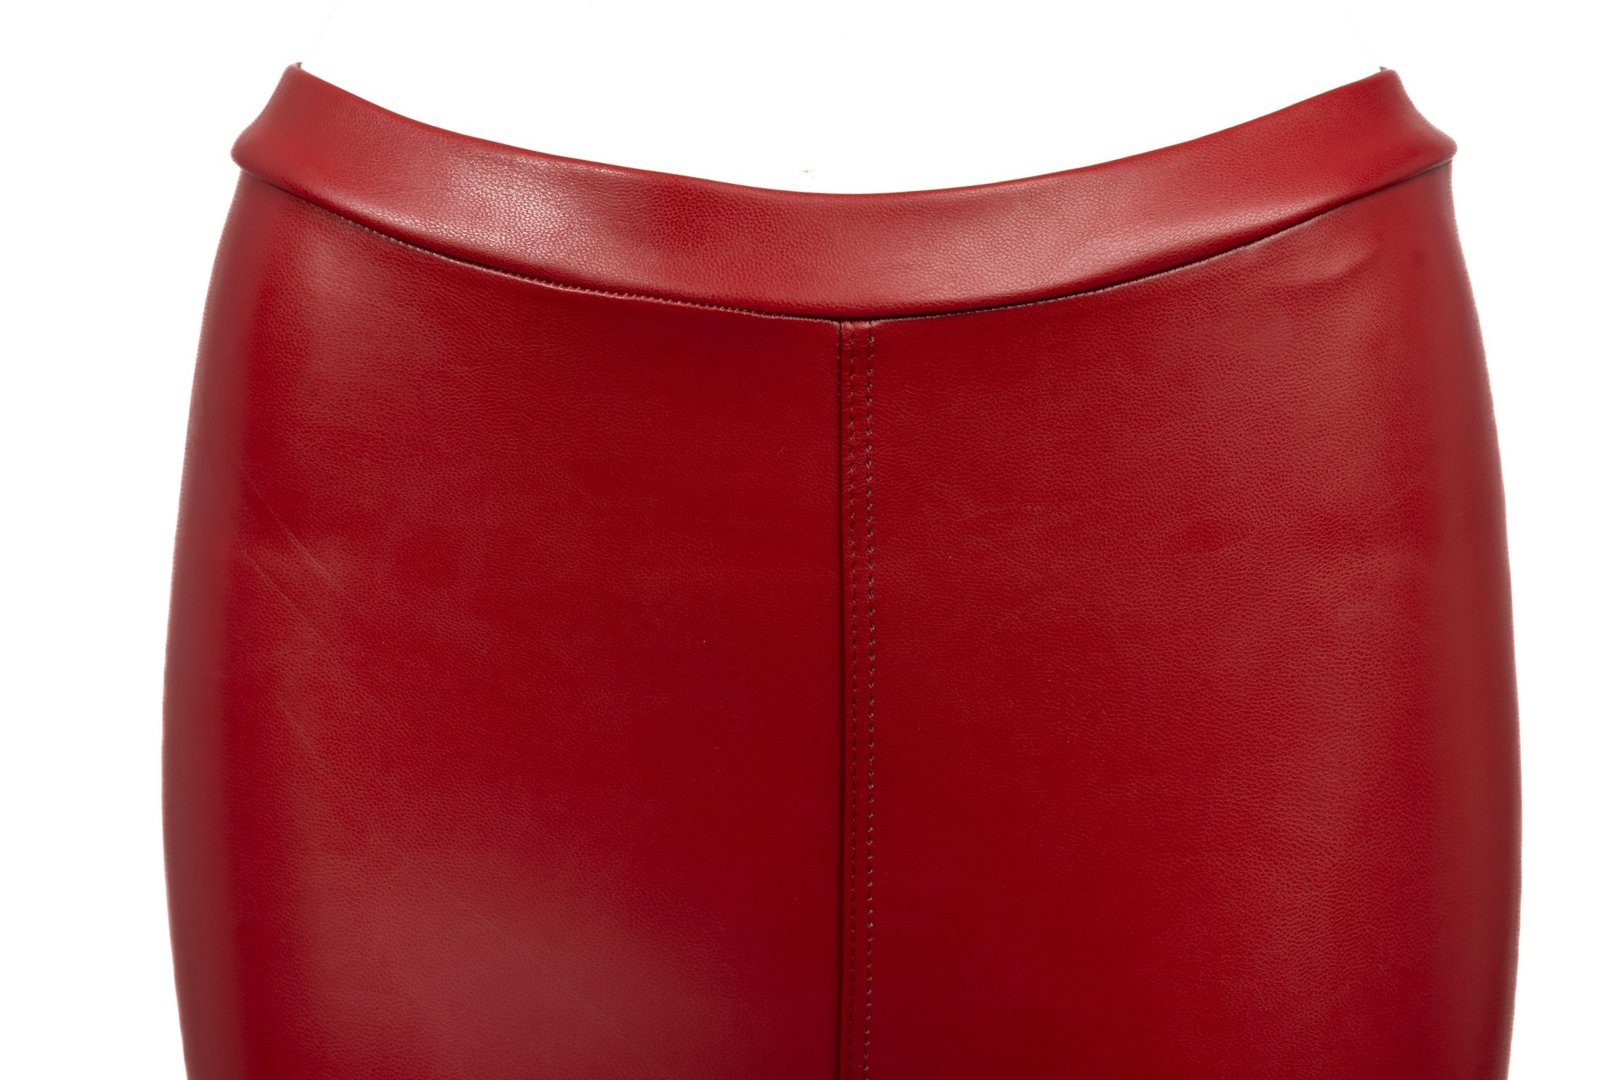 Stretch leather pants as leather leggings dark - red